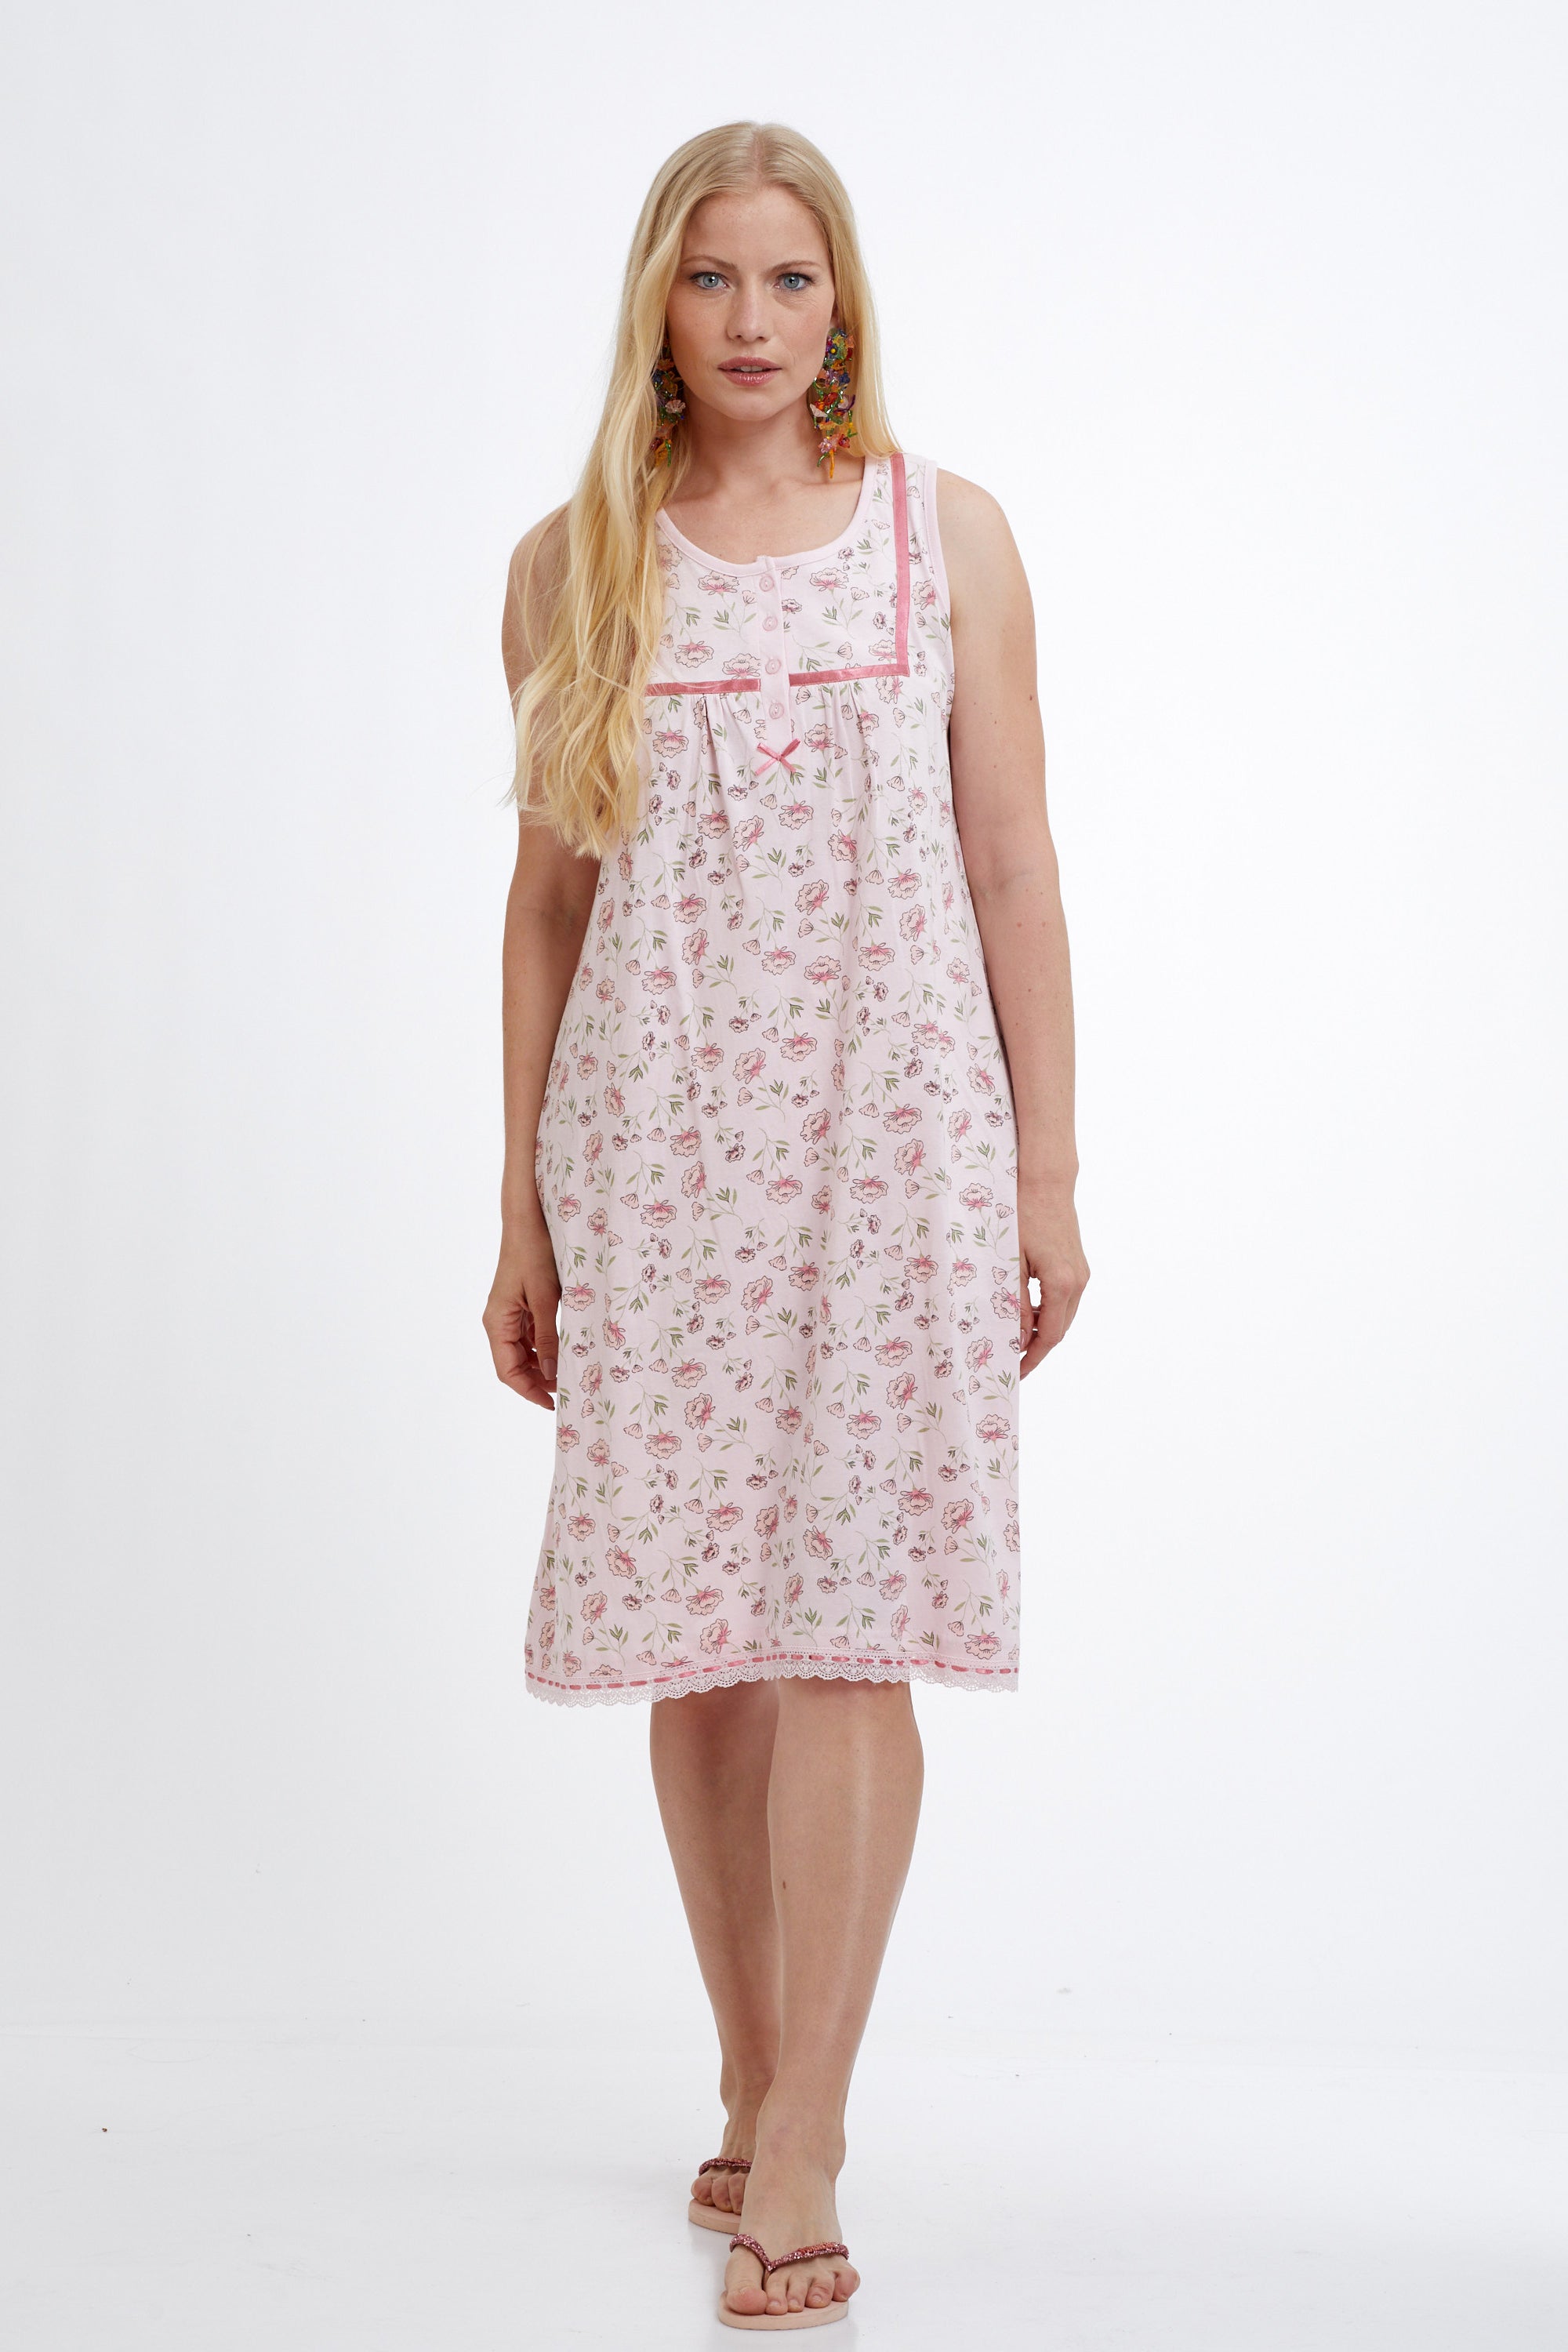 Floral Sleevless Gown Cotton כותונת לילה 100%